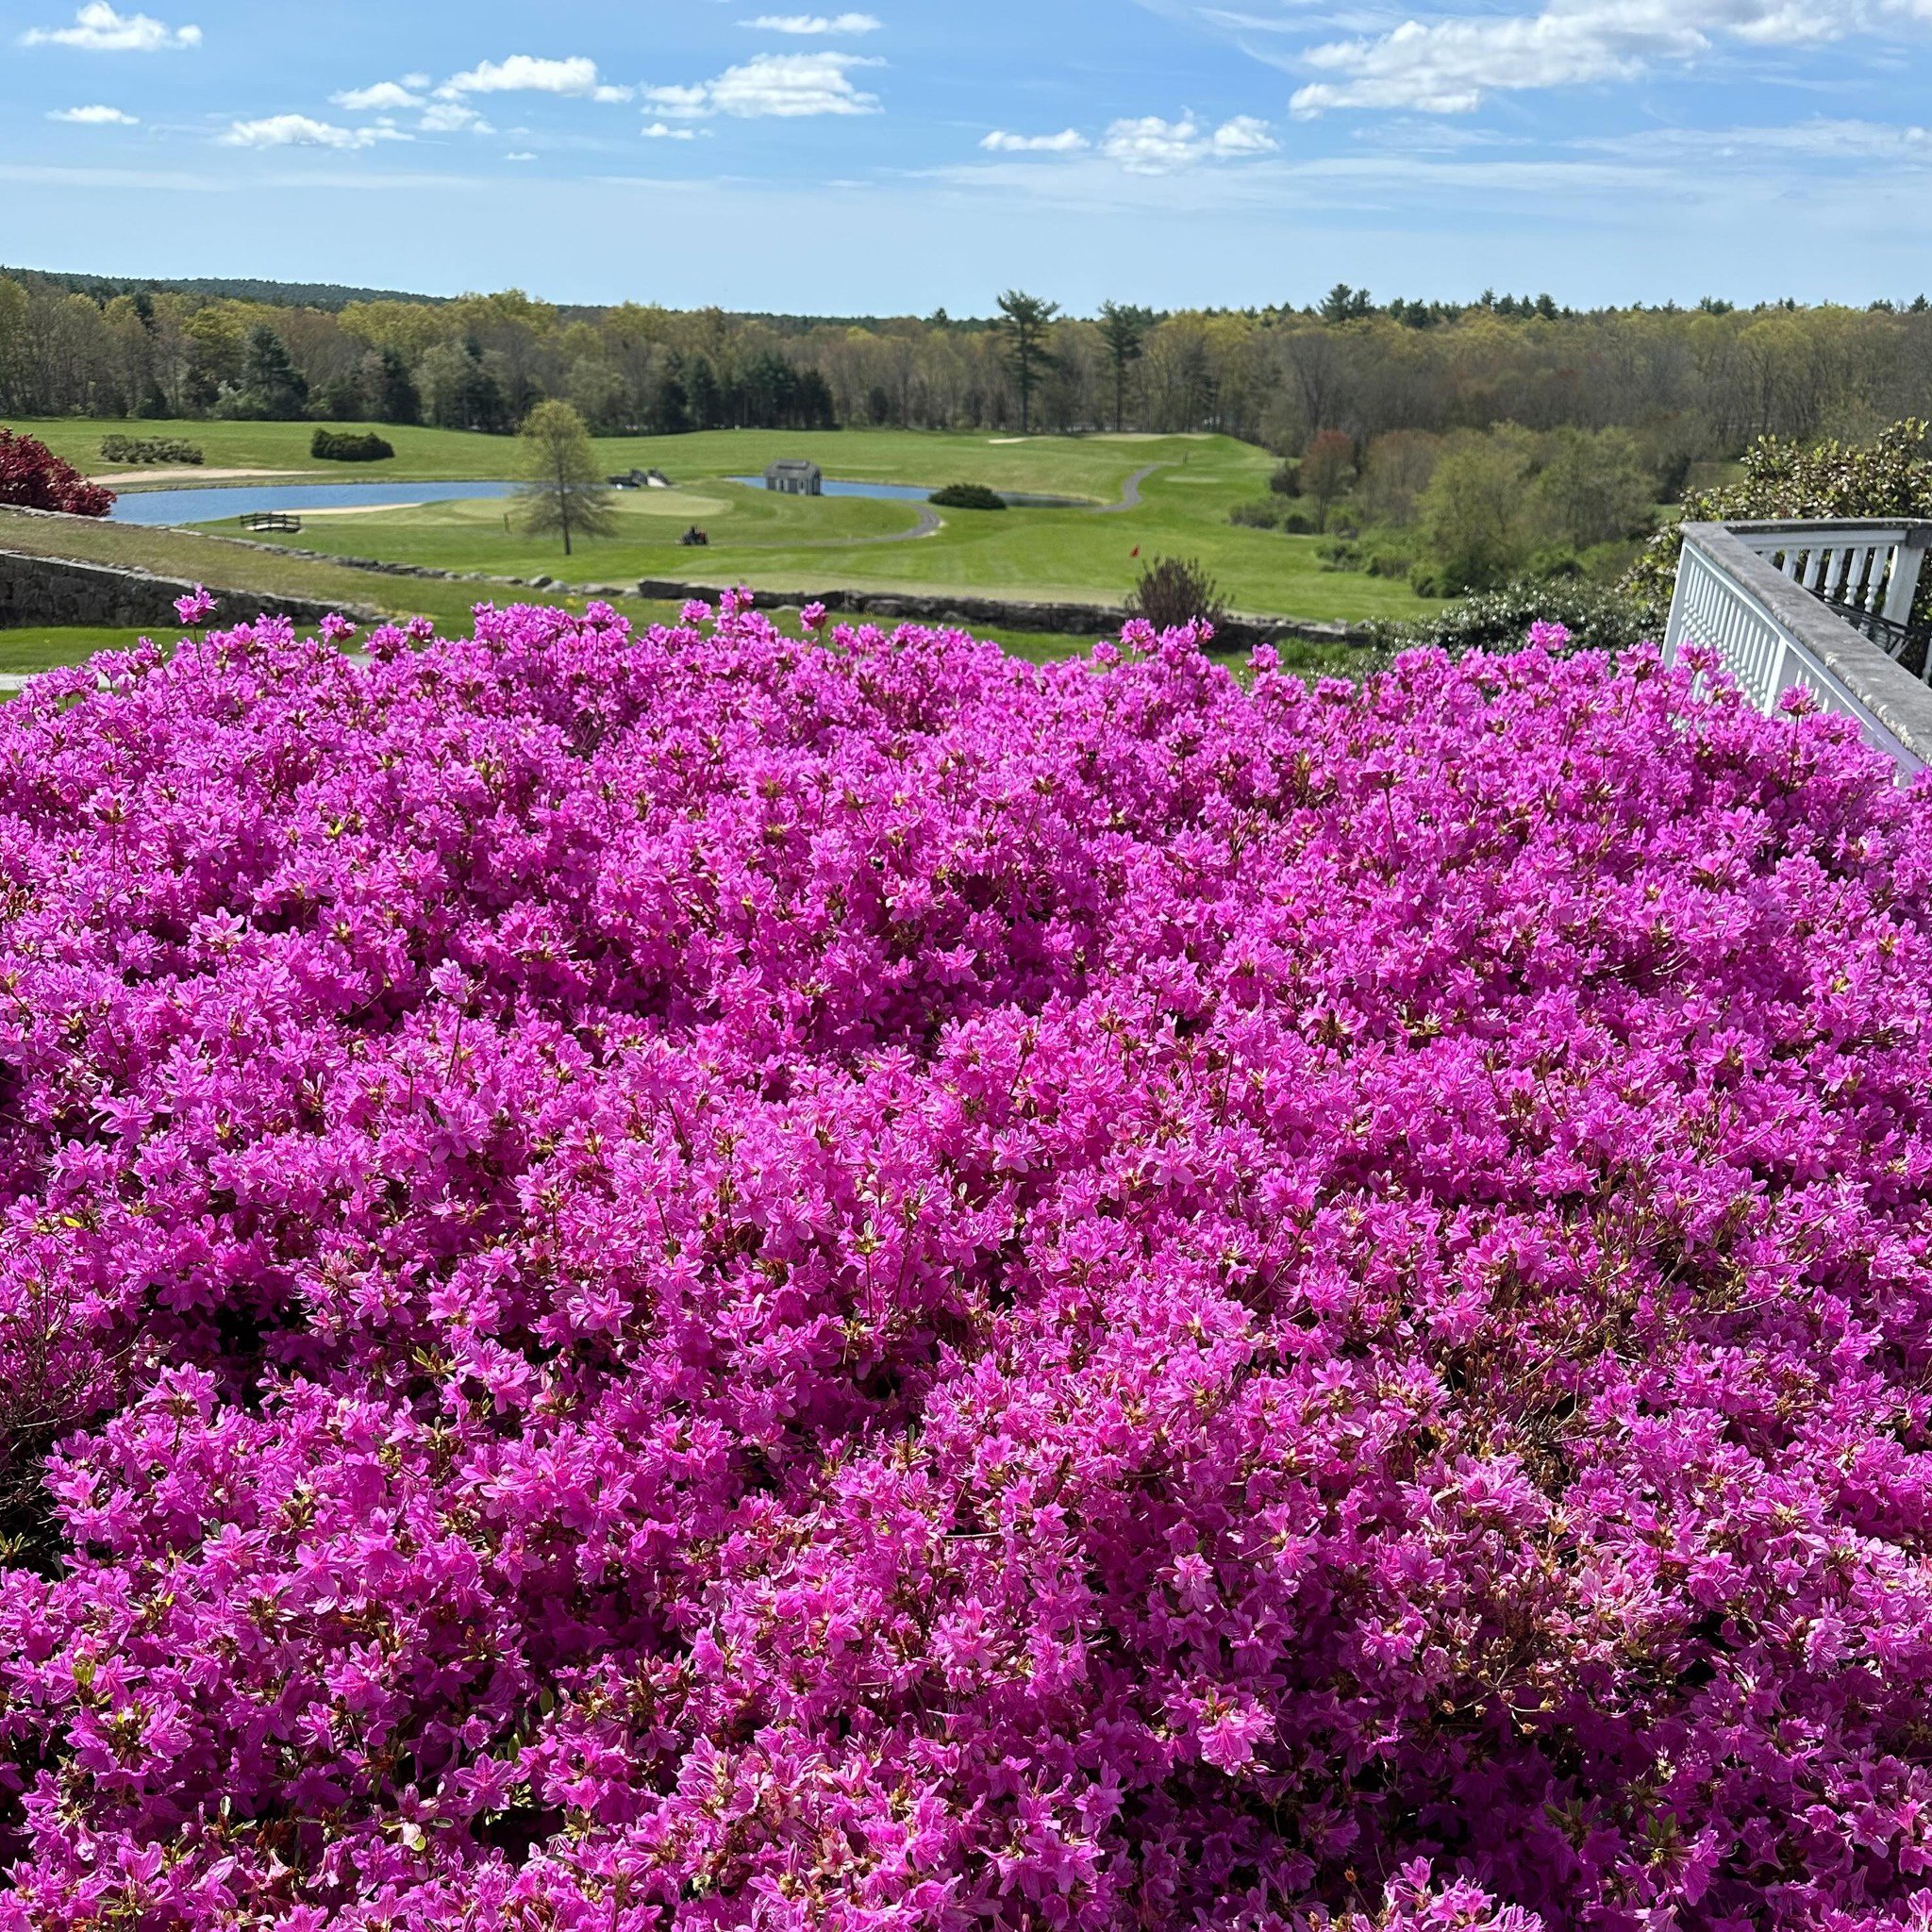 Enjoying the sunshine and beautiful spring colors out on the course today. No filter needed.